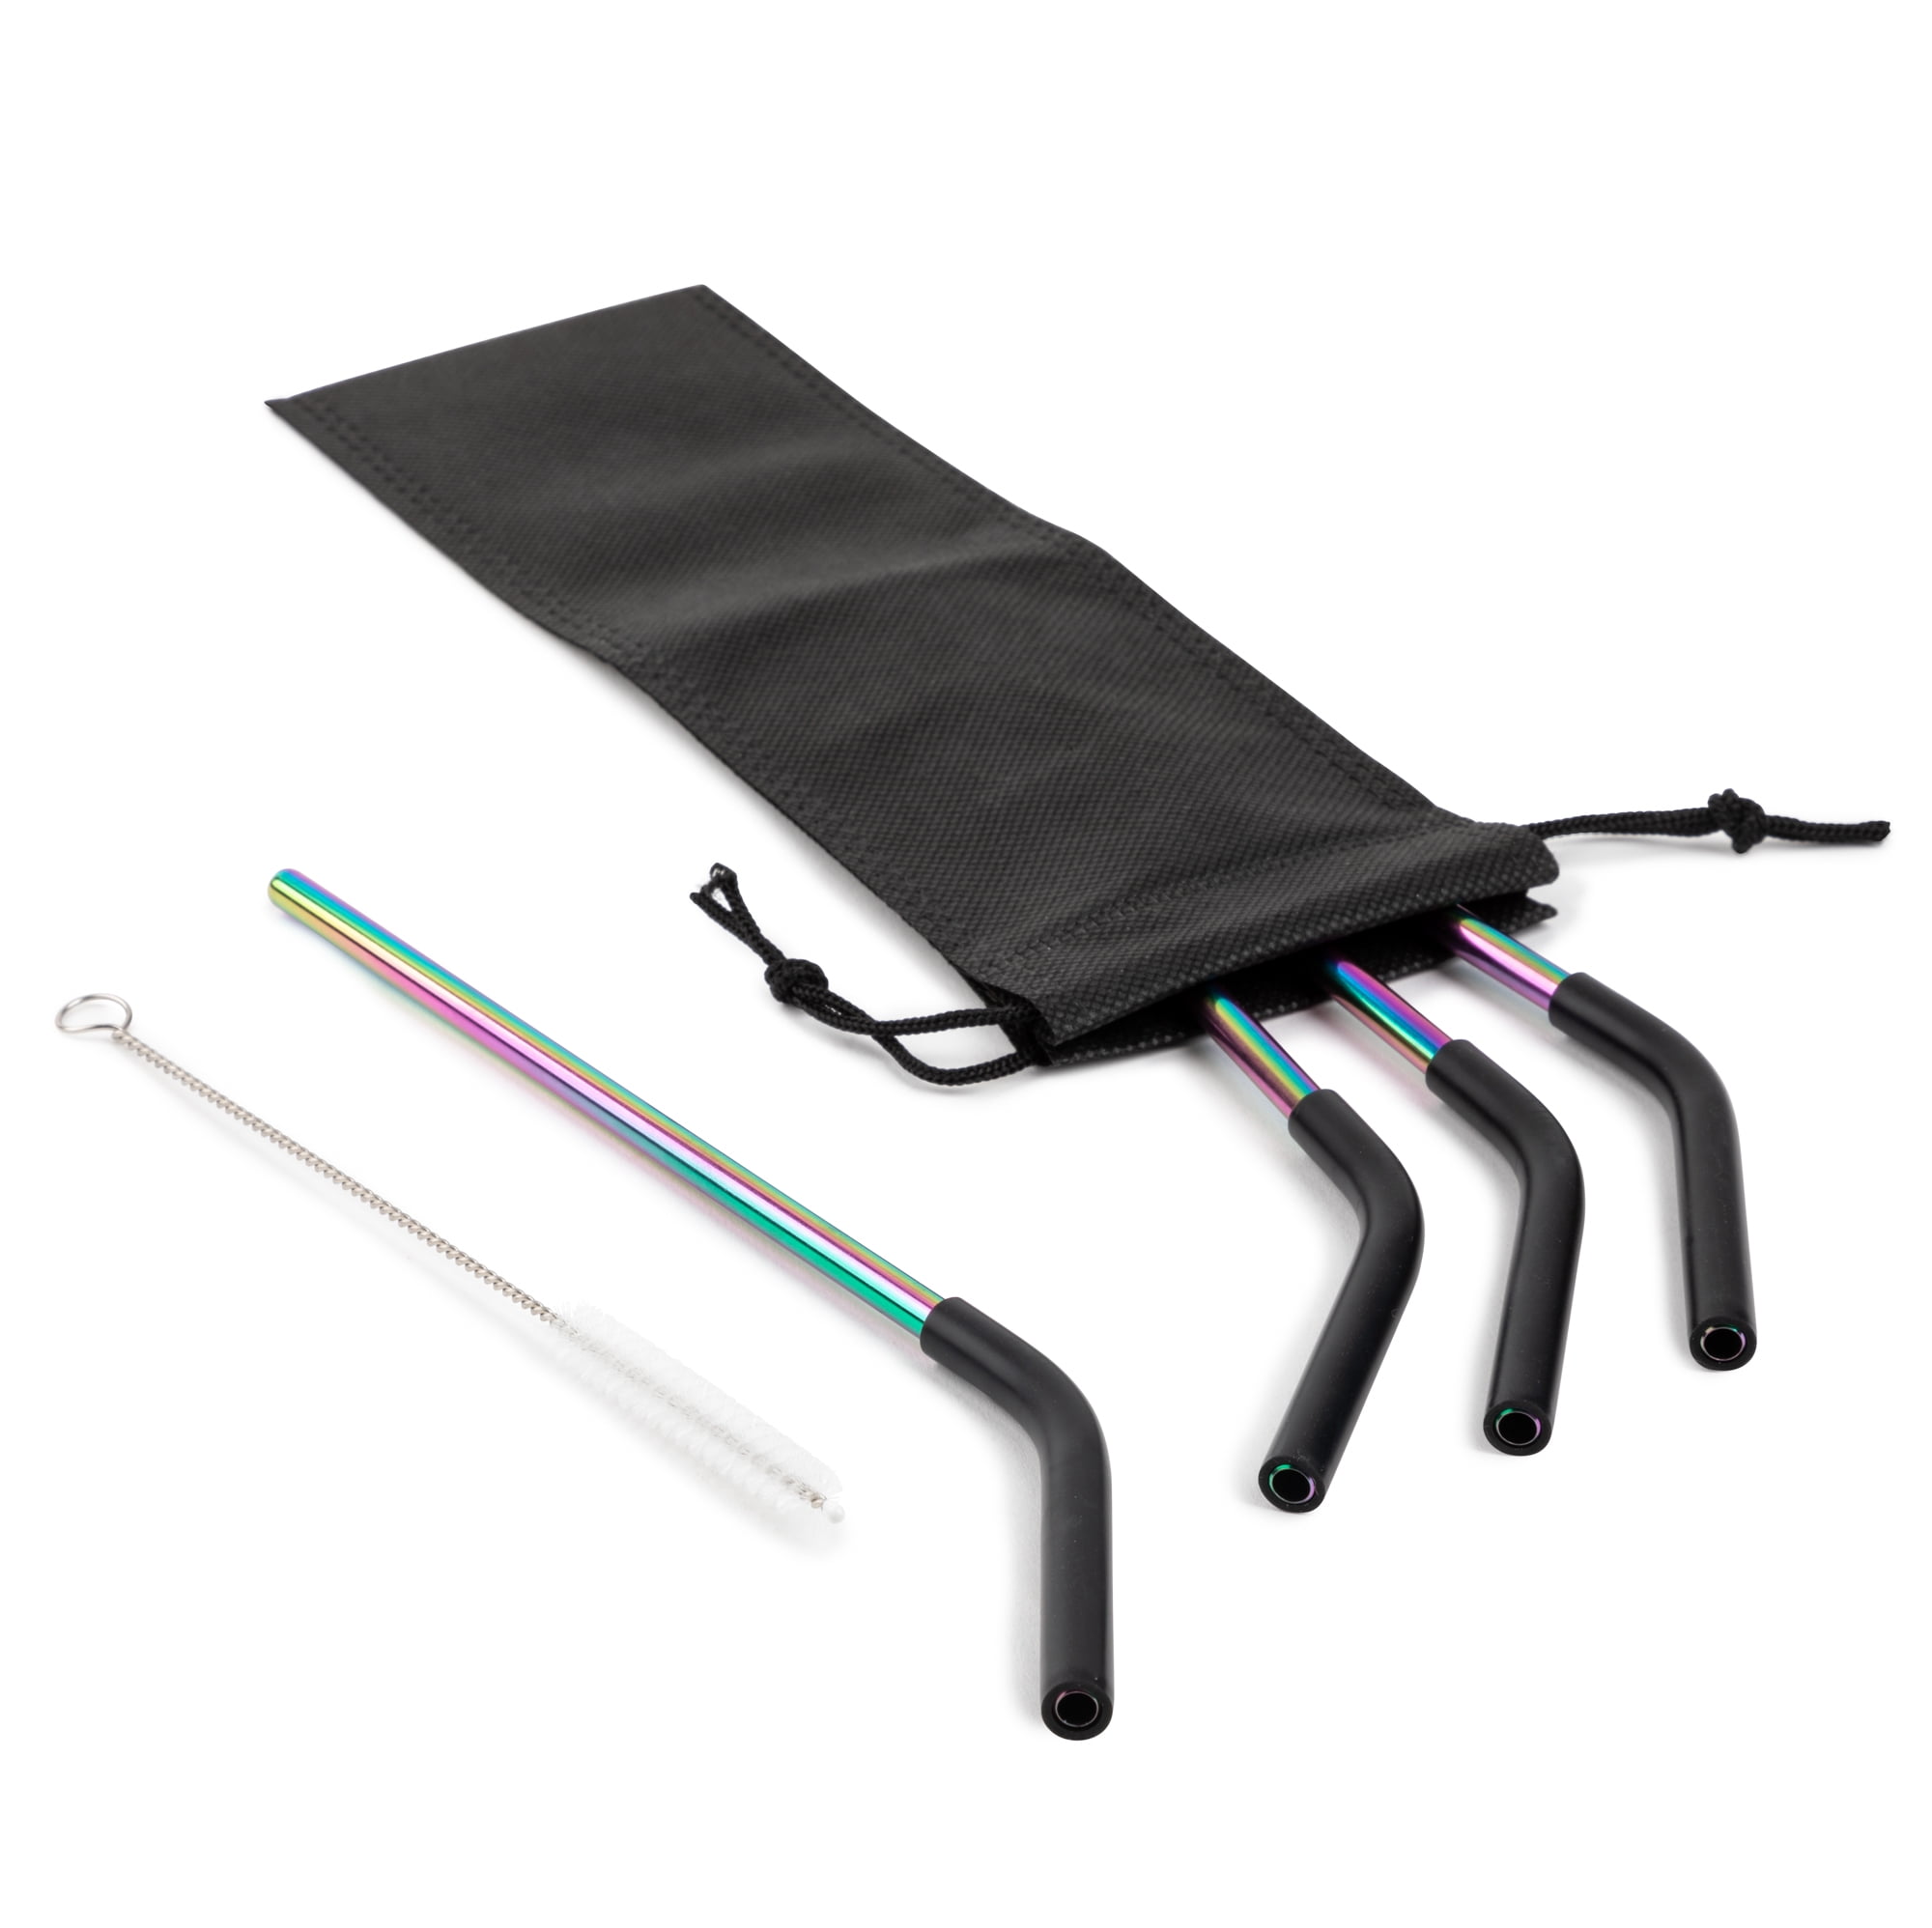 Rainbow Telescopic Reusable Straw Stainless Steel Metal Straw Set Ships from US